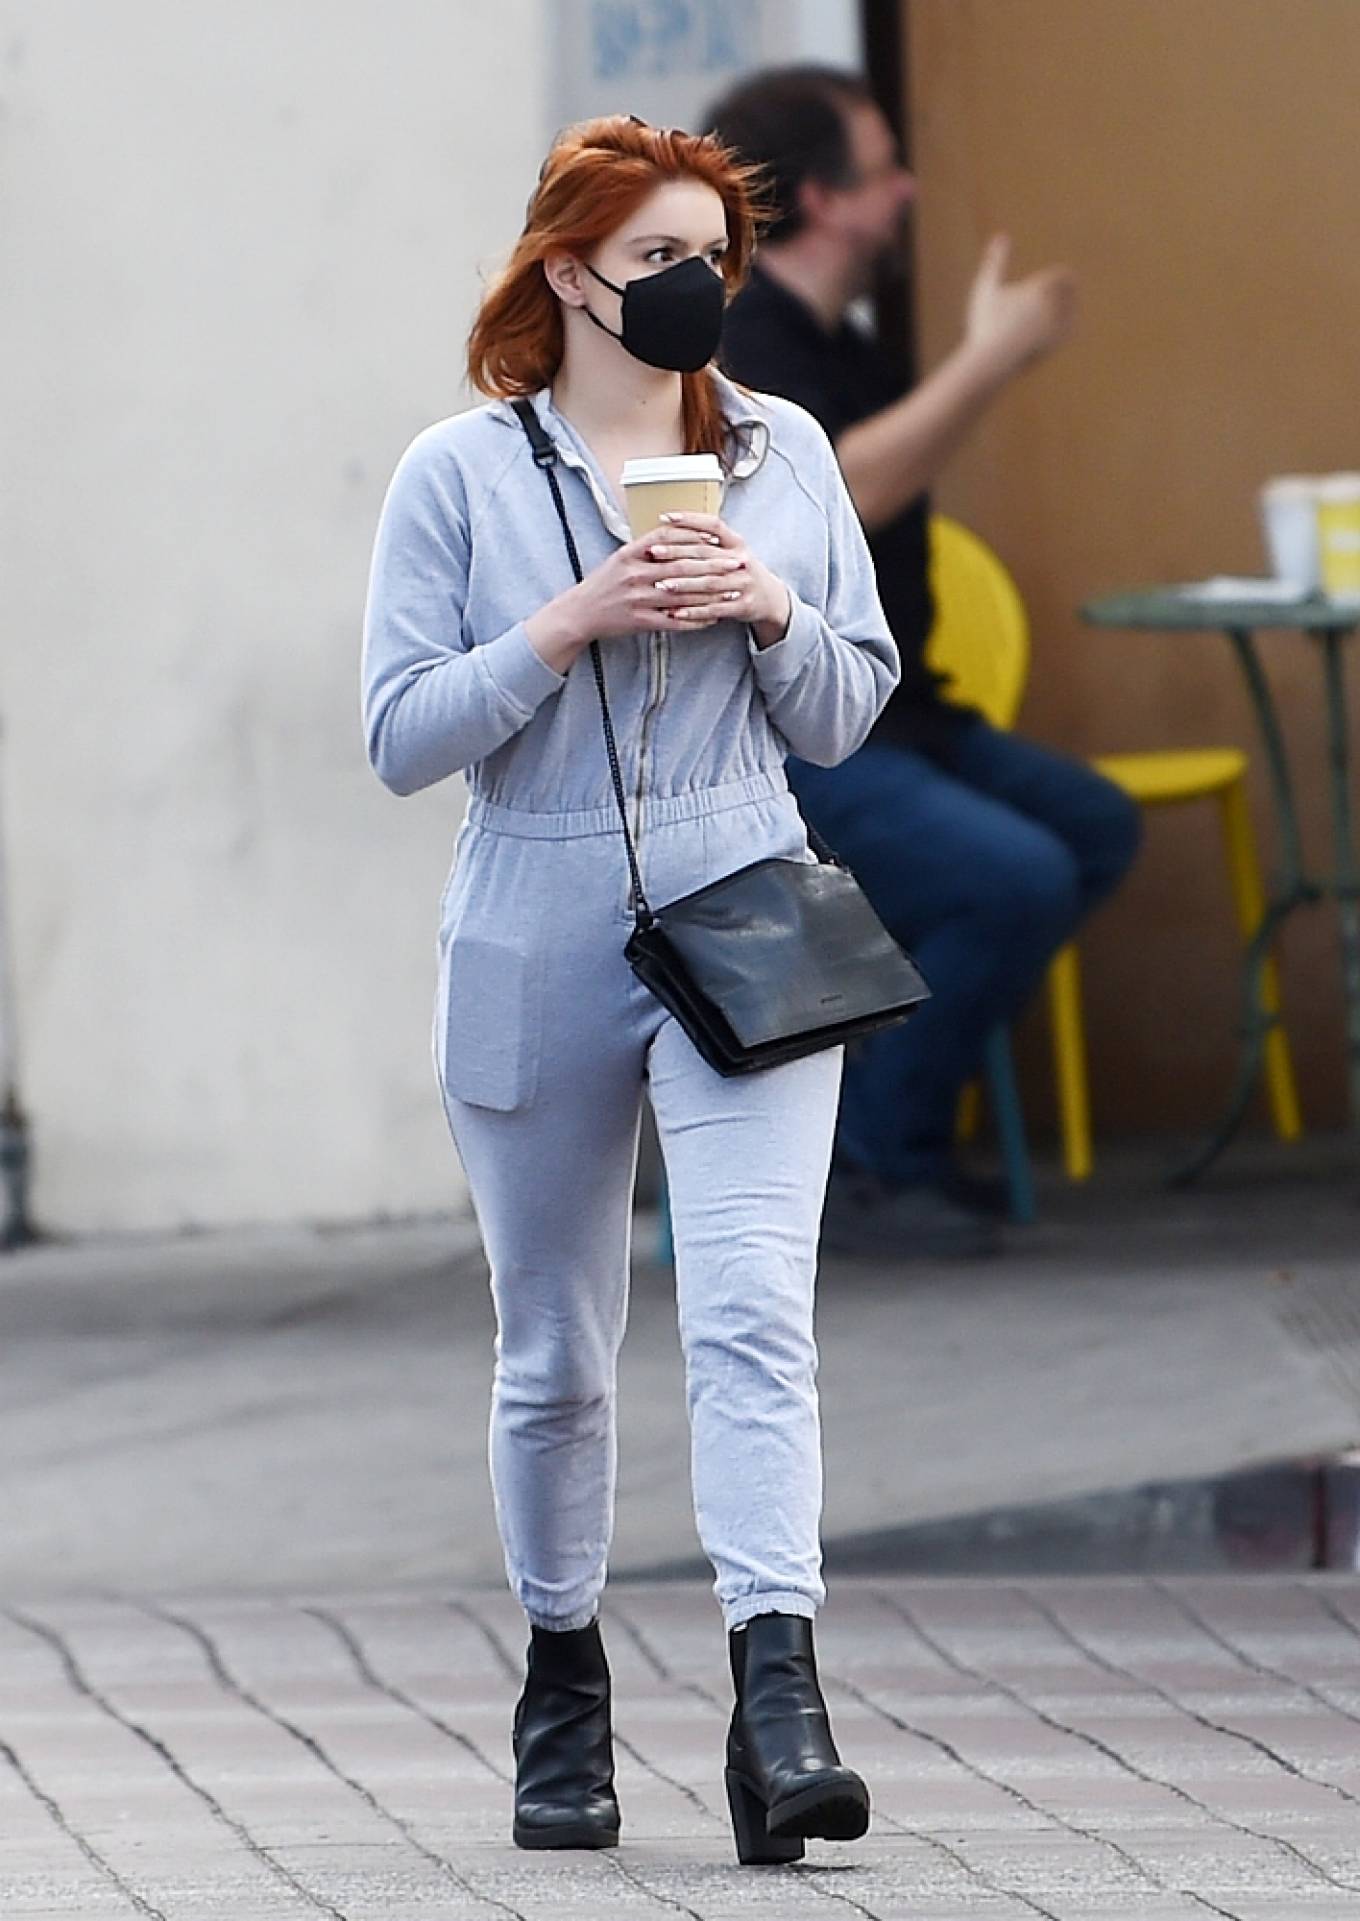 Ariel Winter 2021 : Ariel Winter – Grabs a cup of coffee in West Hollywood-24